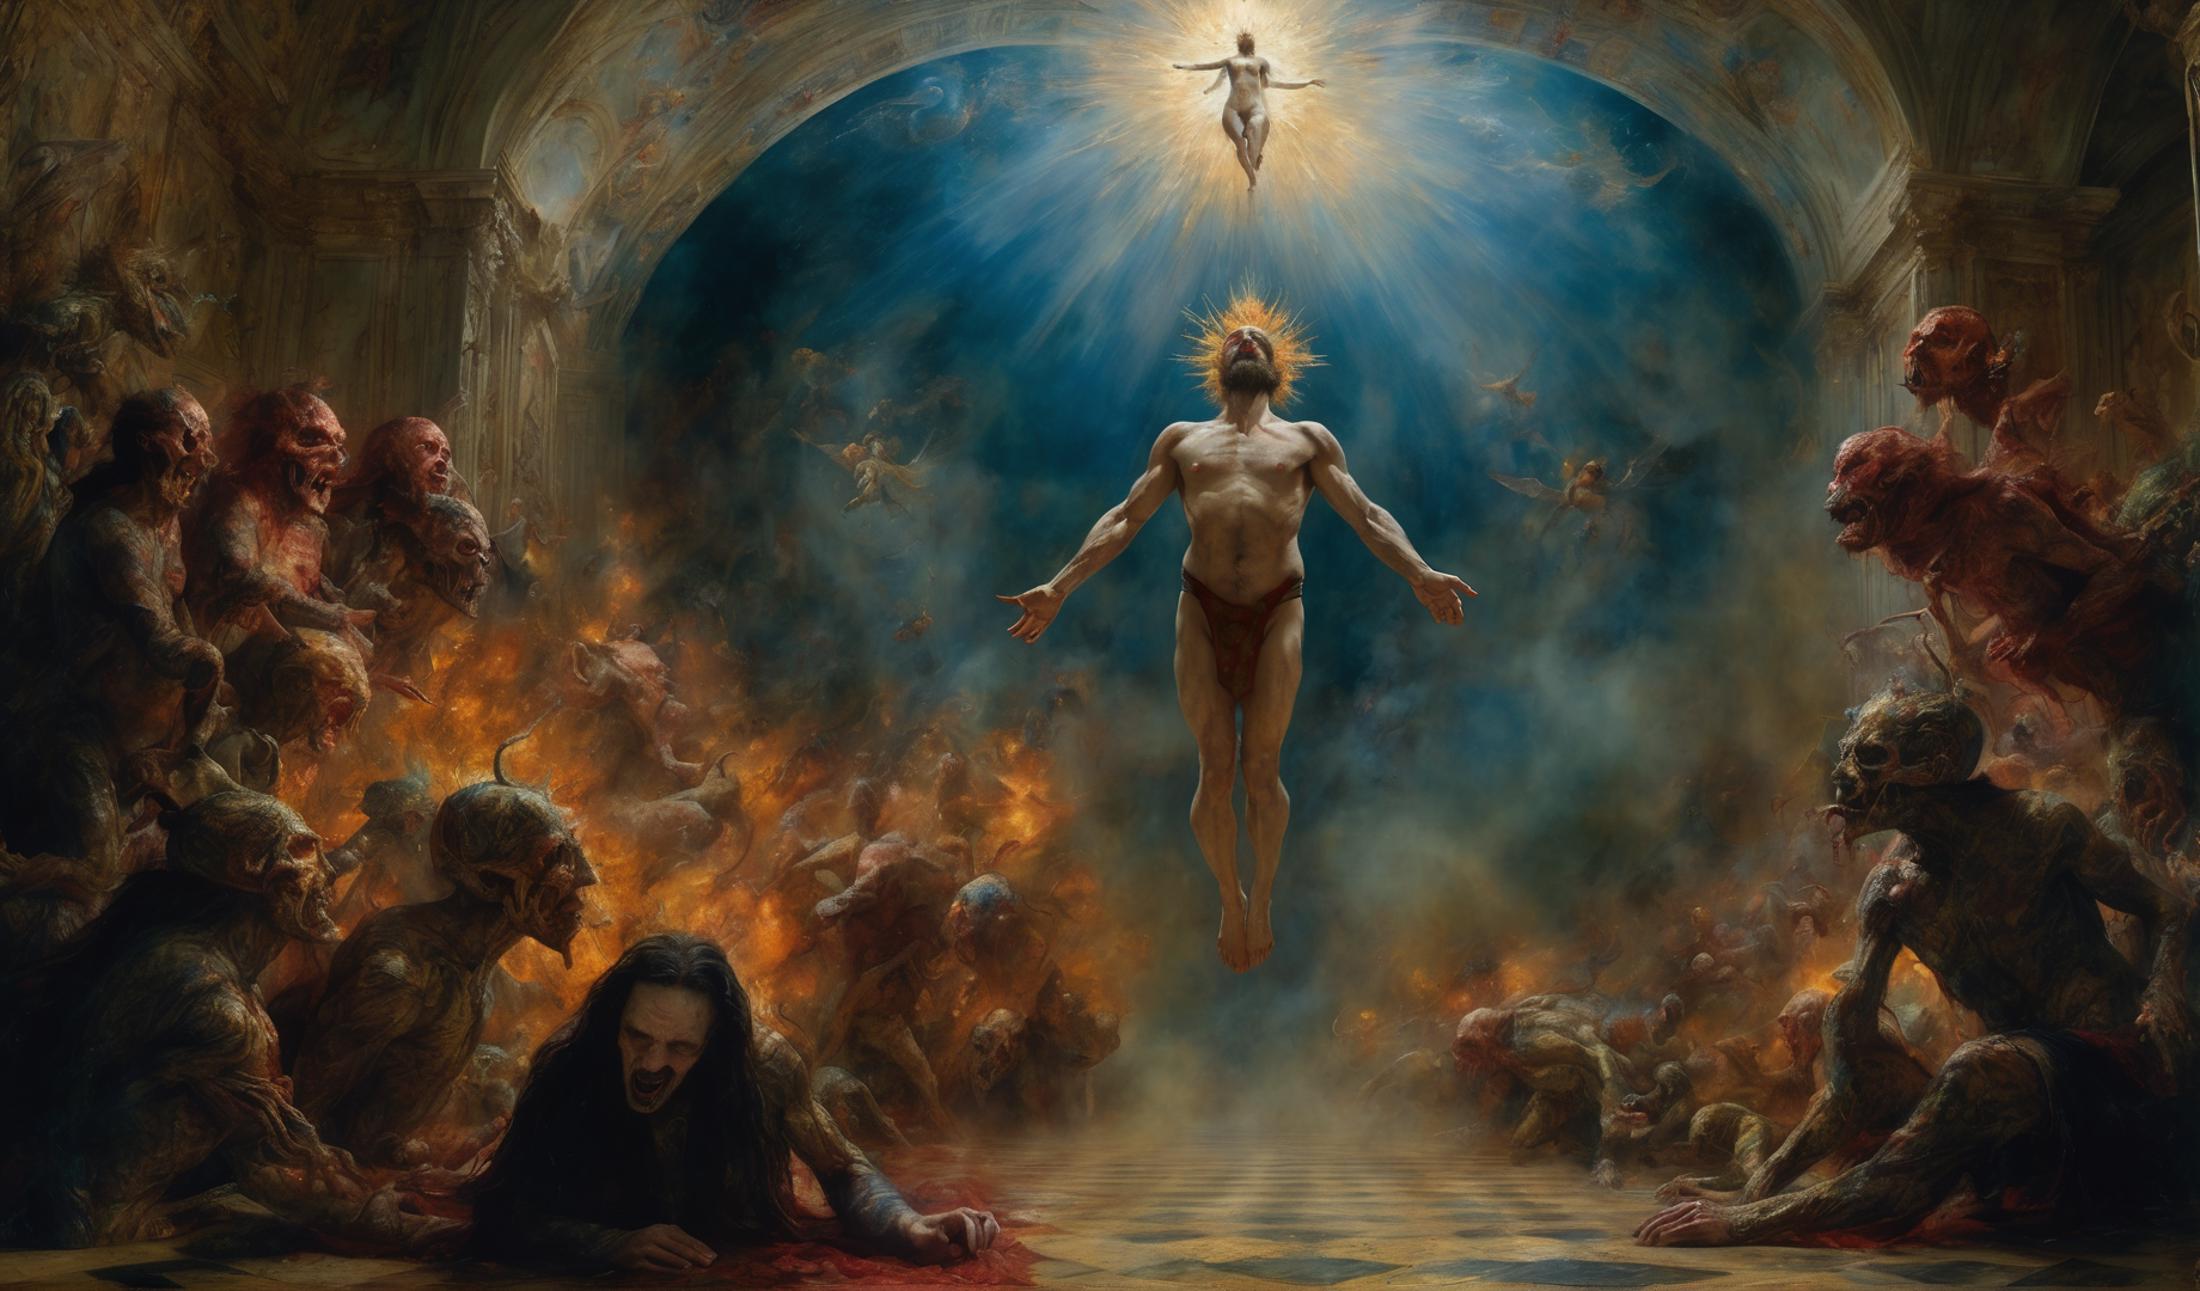 "The Ascension of Christ"